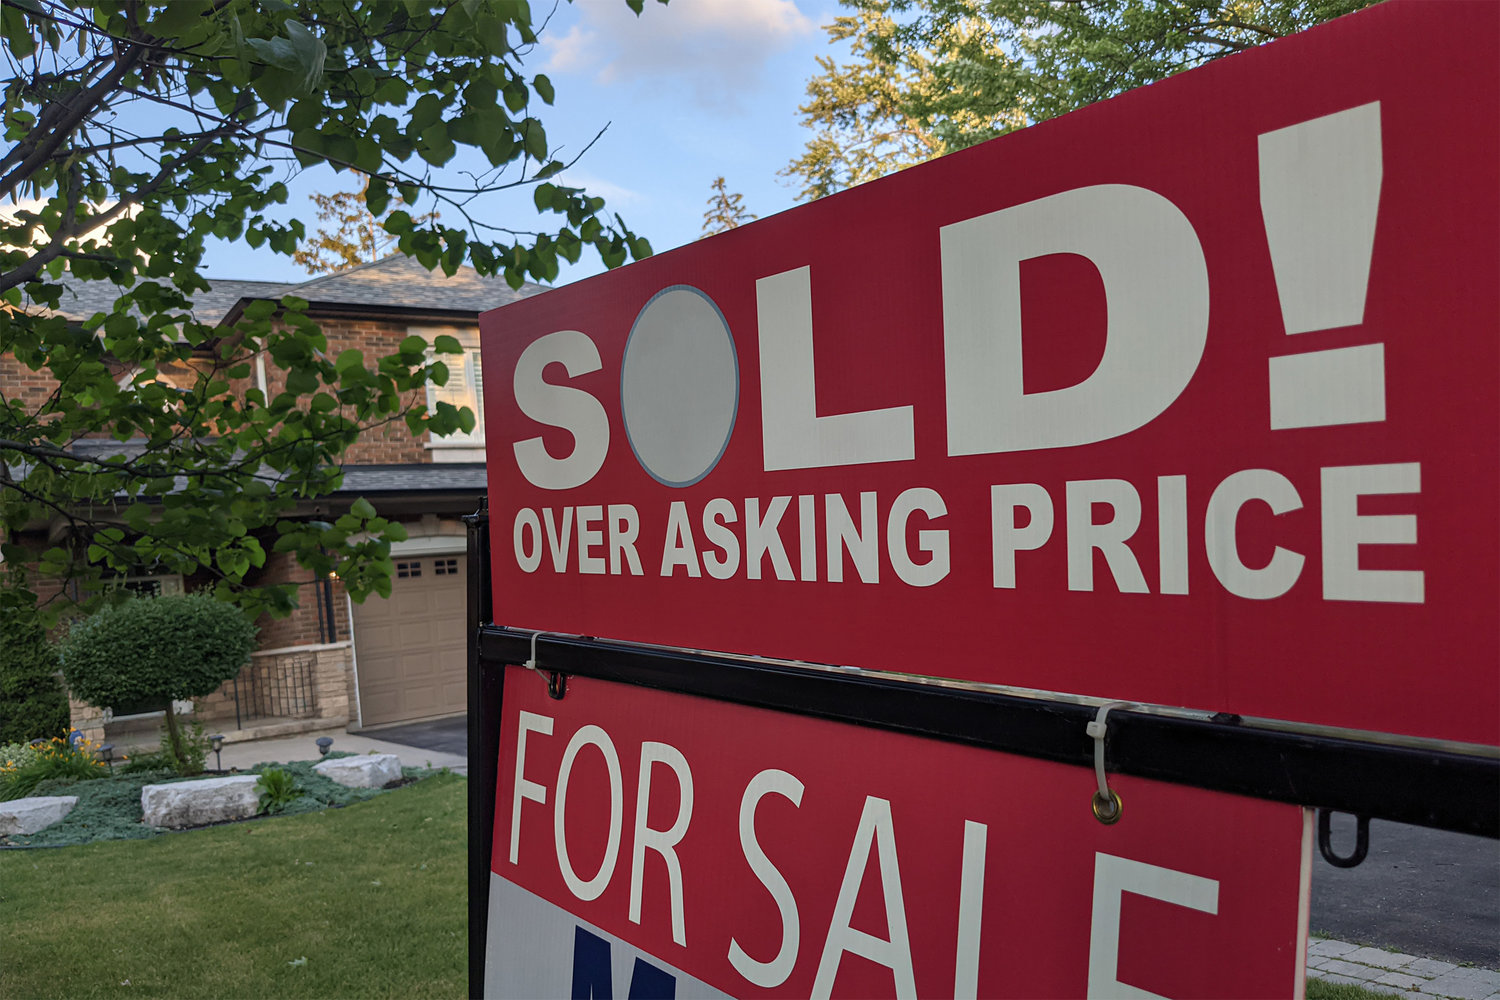 Prices have come down some since last year, but it remains a sellers’ market.